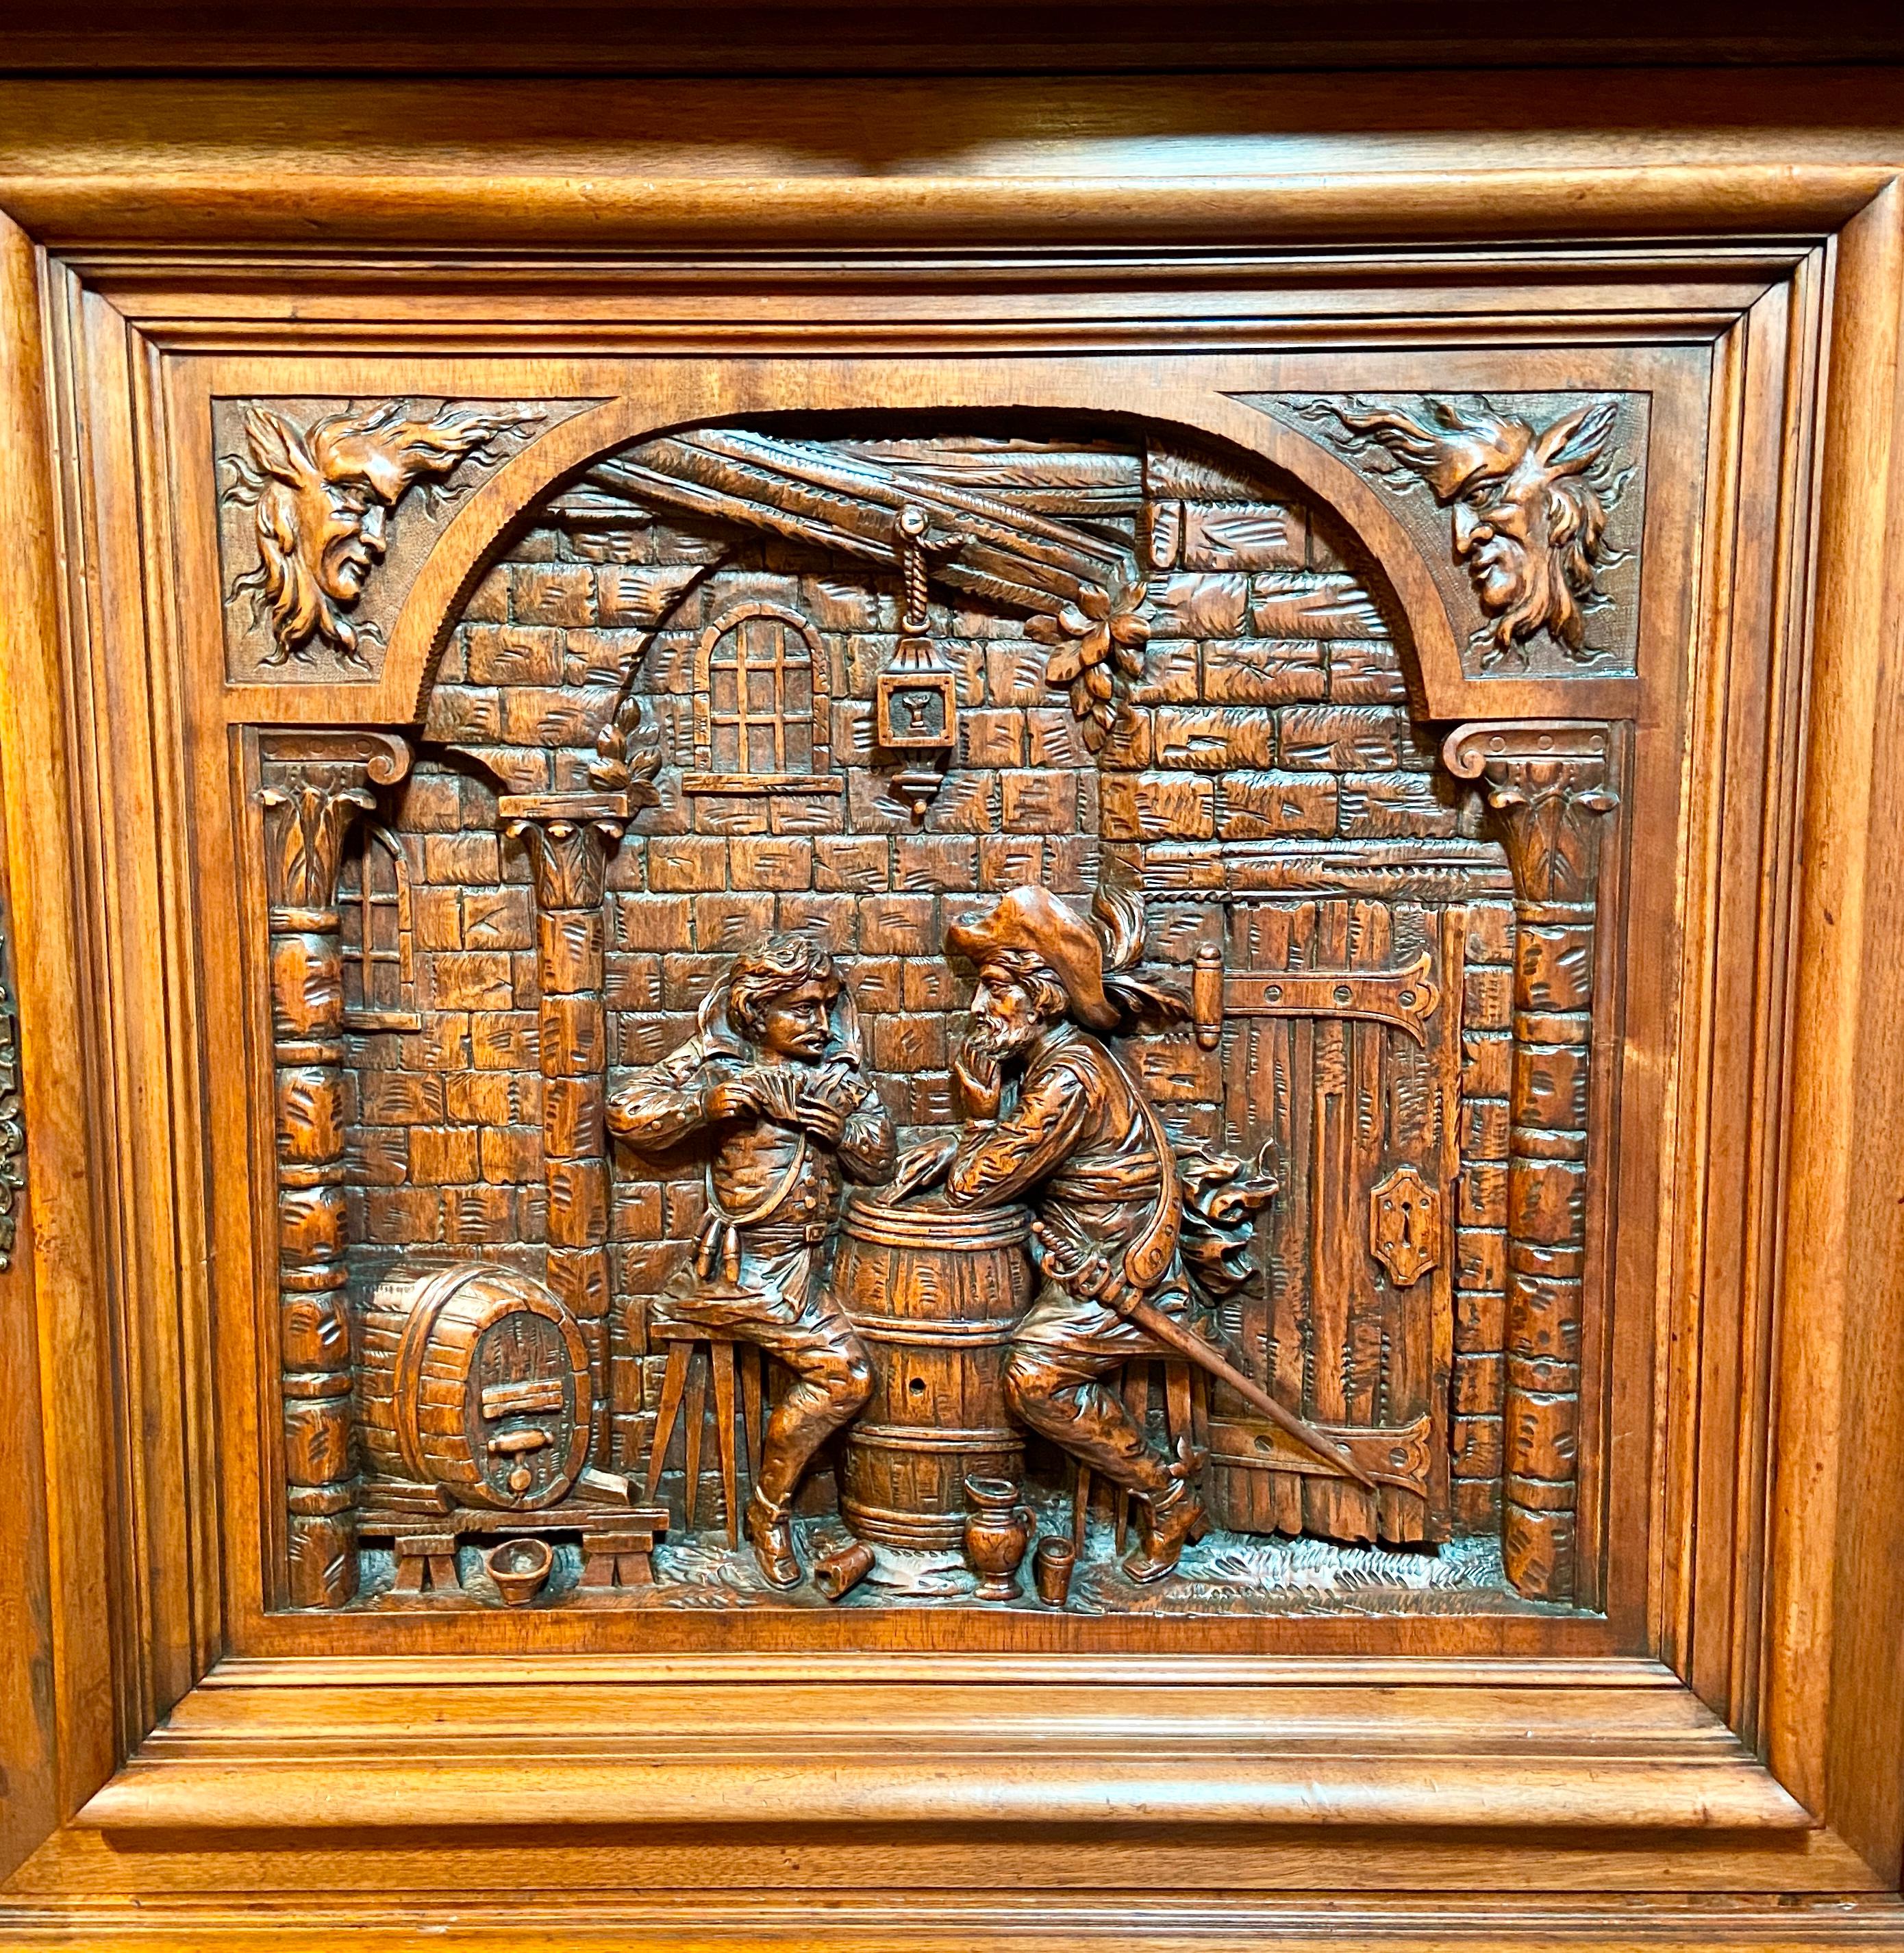 Antique Mid 19th Century French Premier Carved Walnut Vesalier Cabinet In Good Condition For Sale In New Orleans, LA